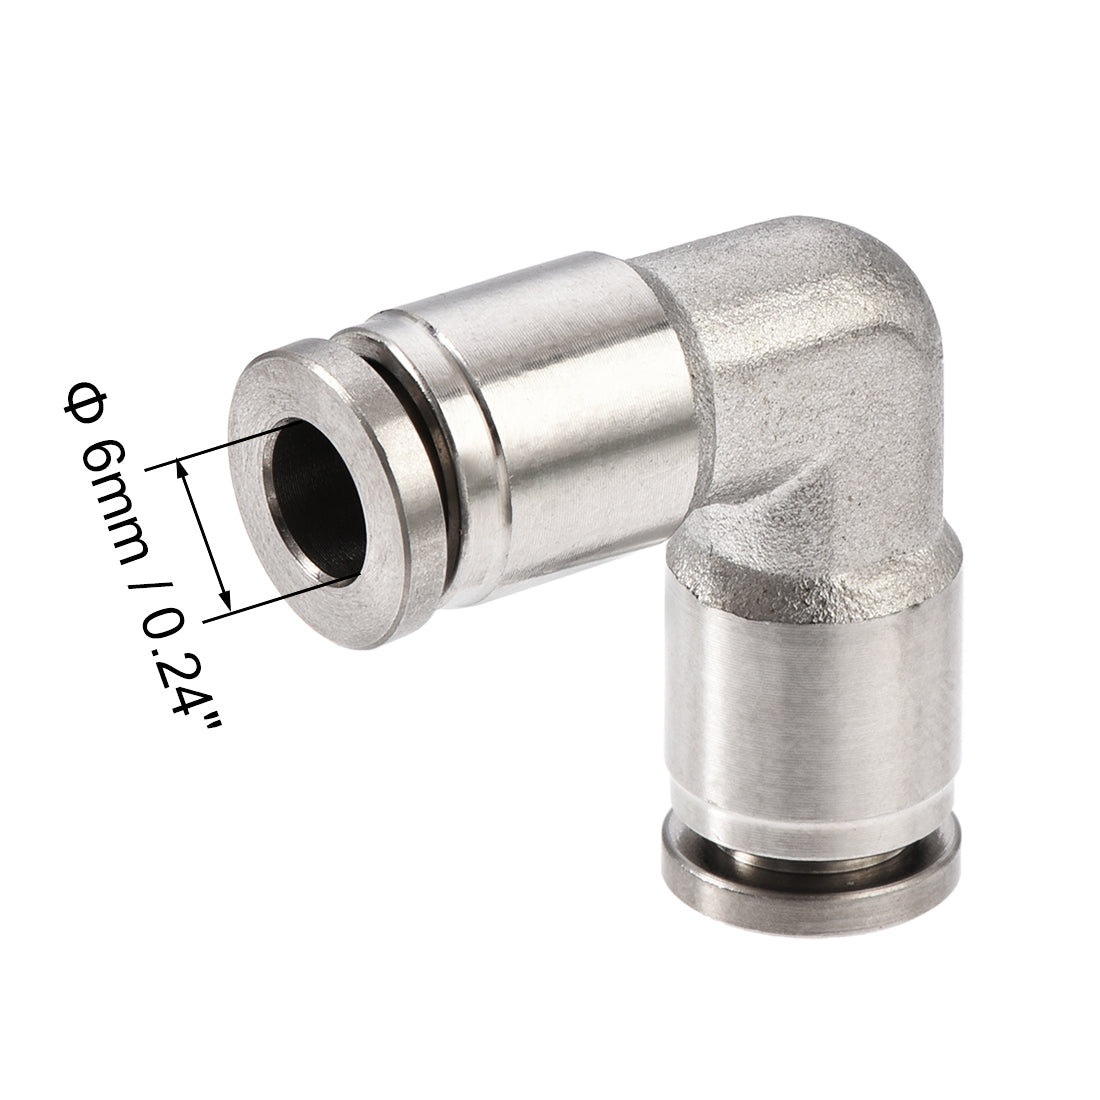 Uxcell Uxcell Push to Connect Tube Fitting L Shape Pneumatic Connector for 6mm OD Tube